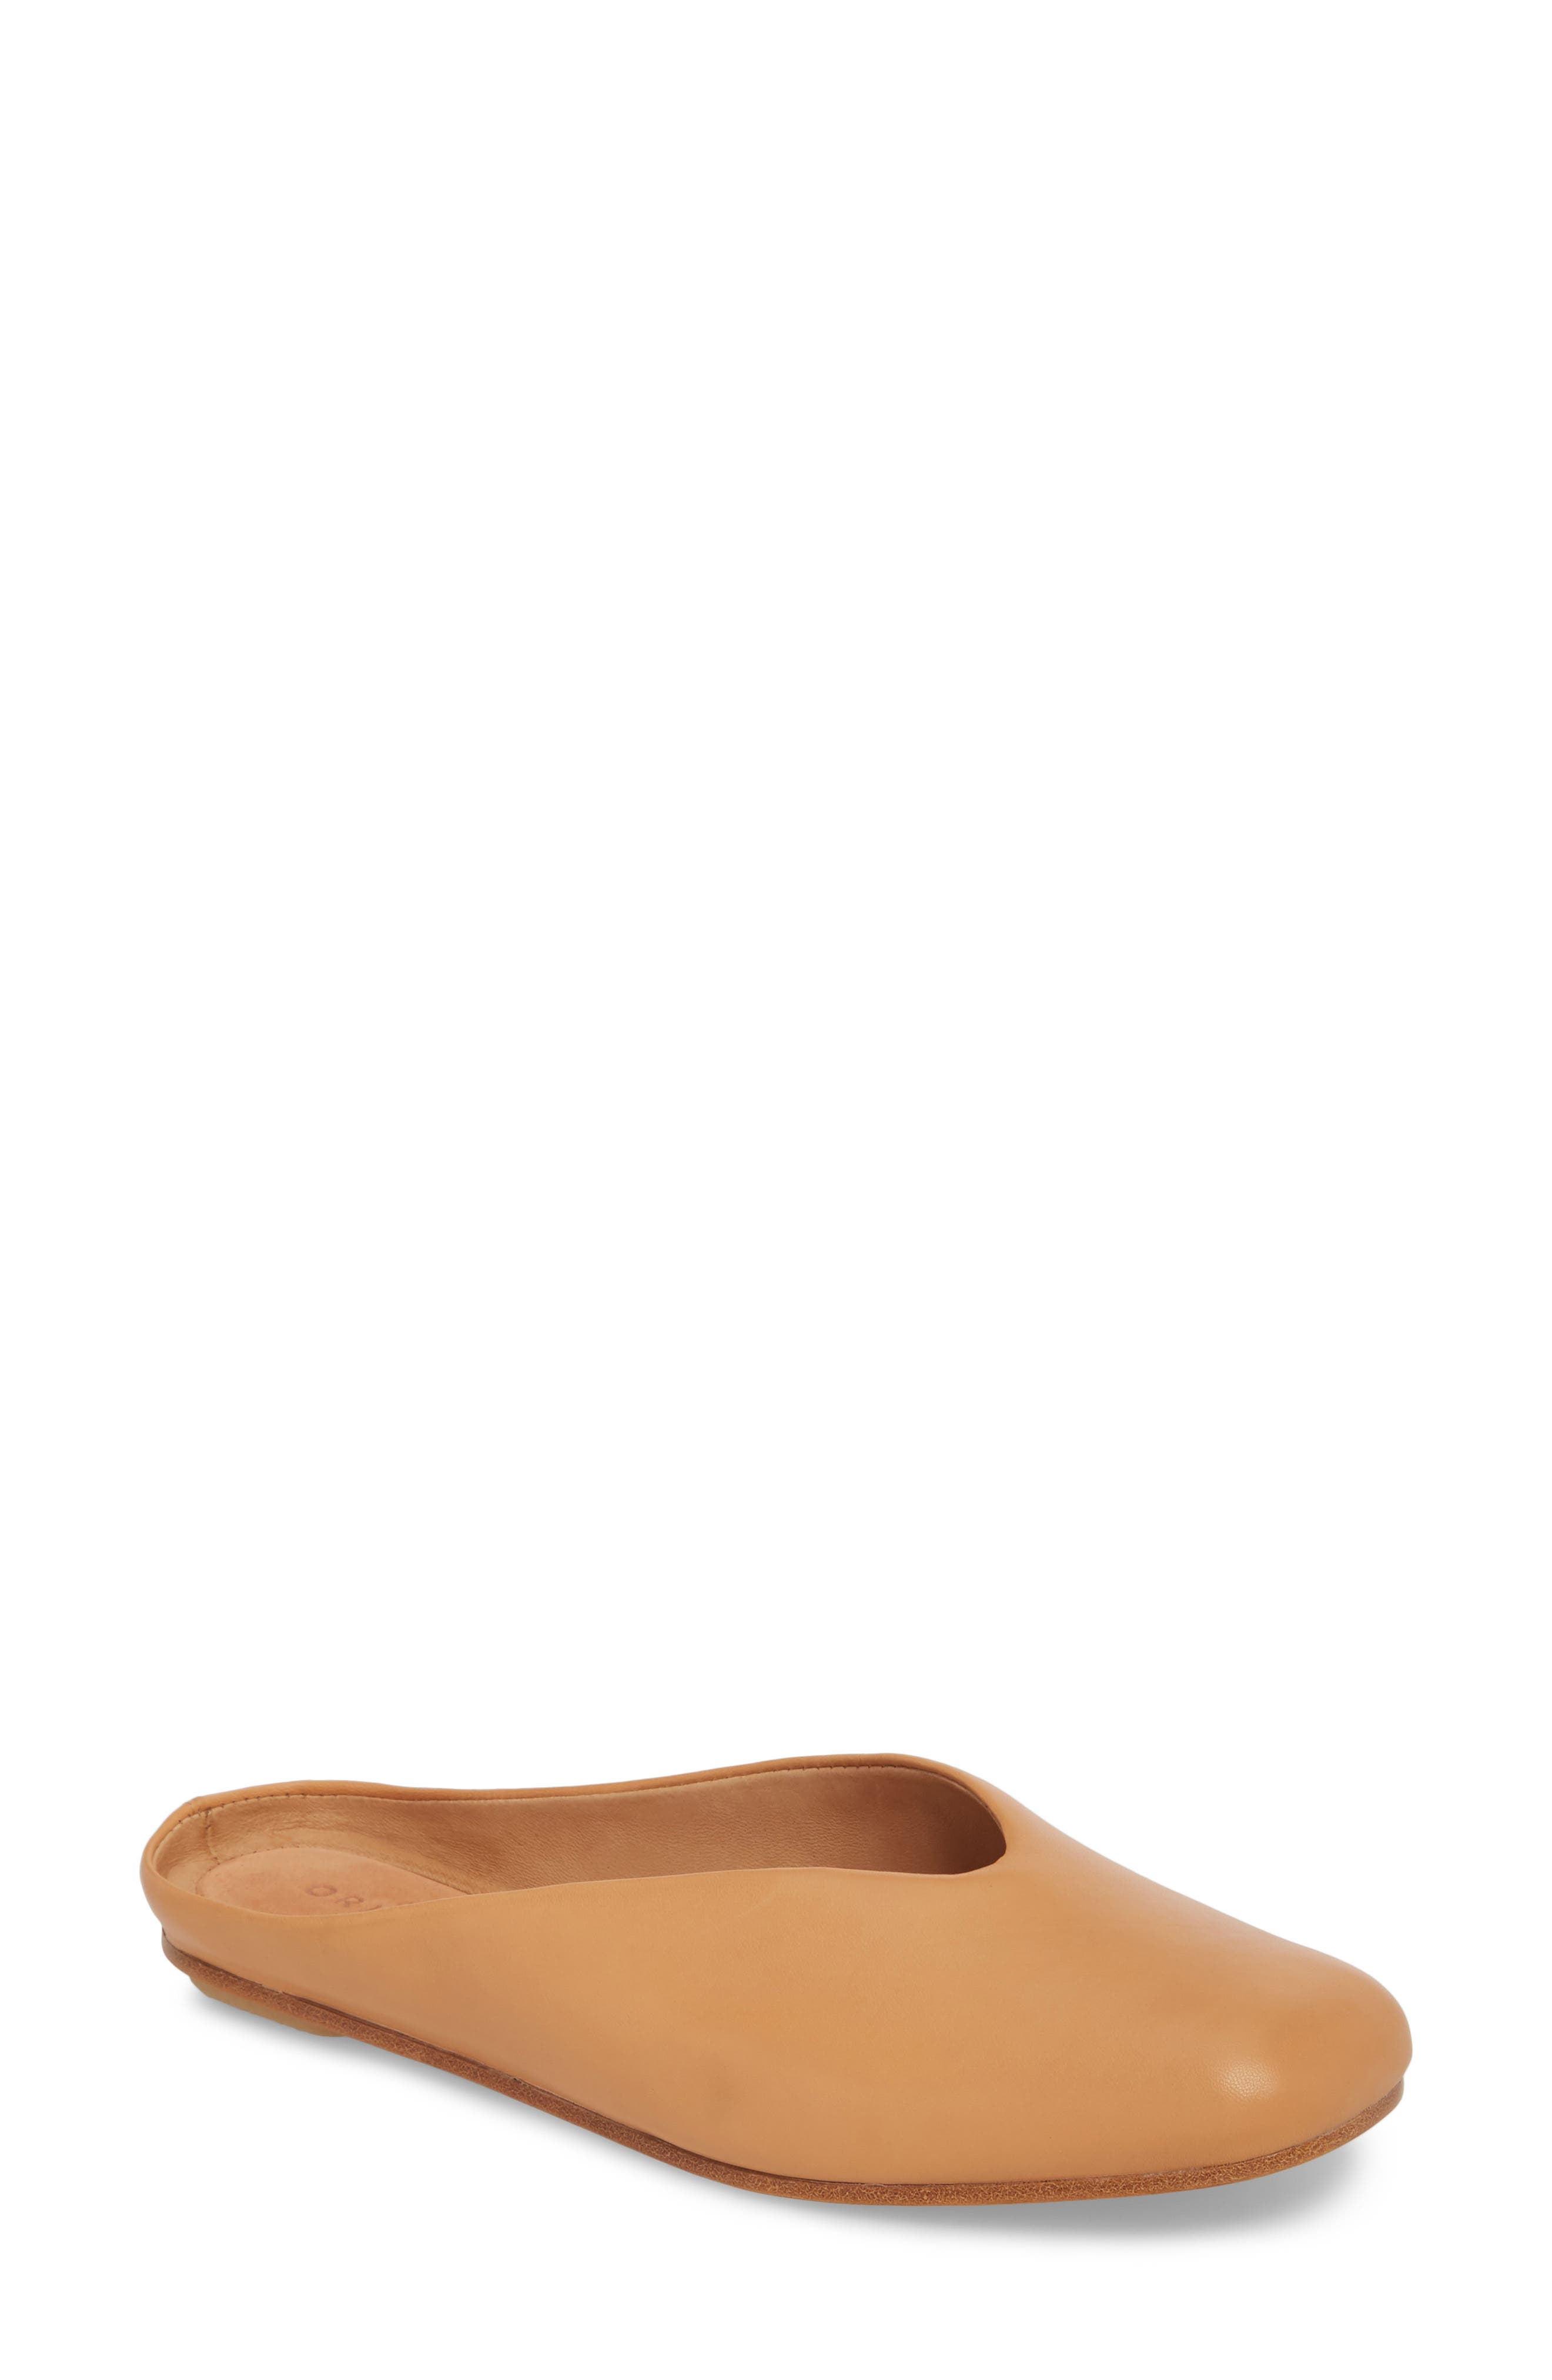 clarks womens clearance shoes